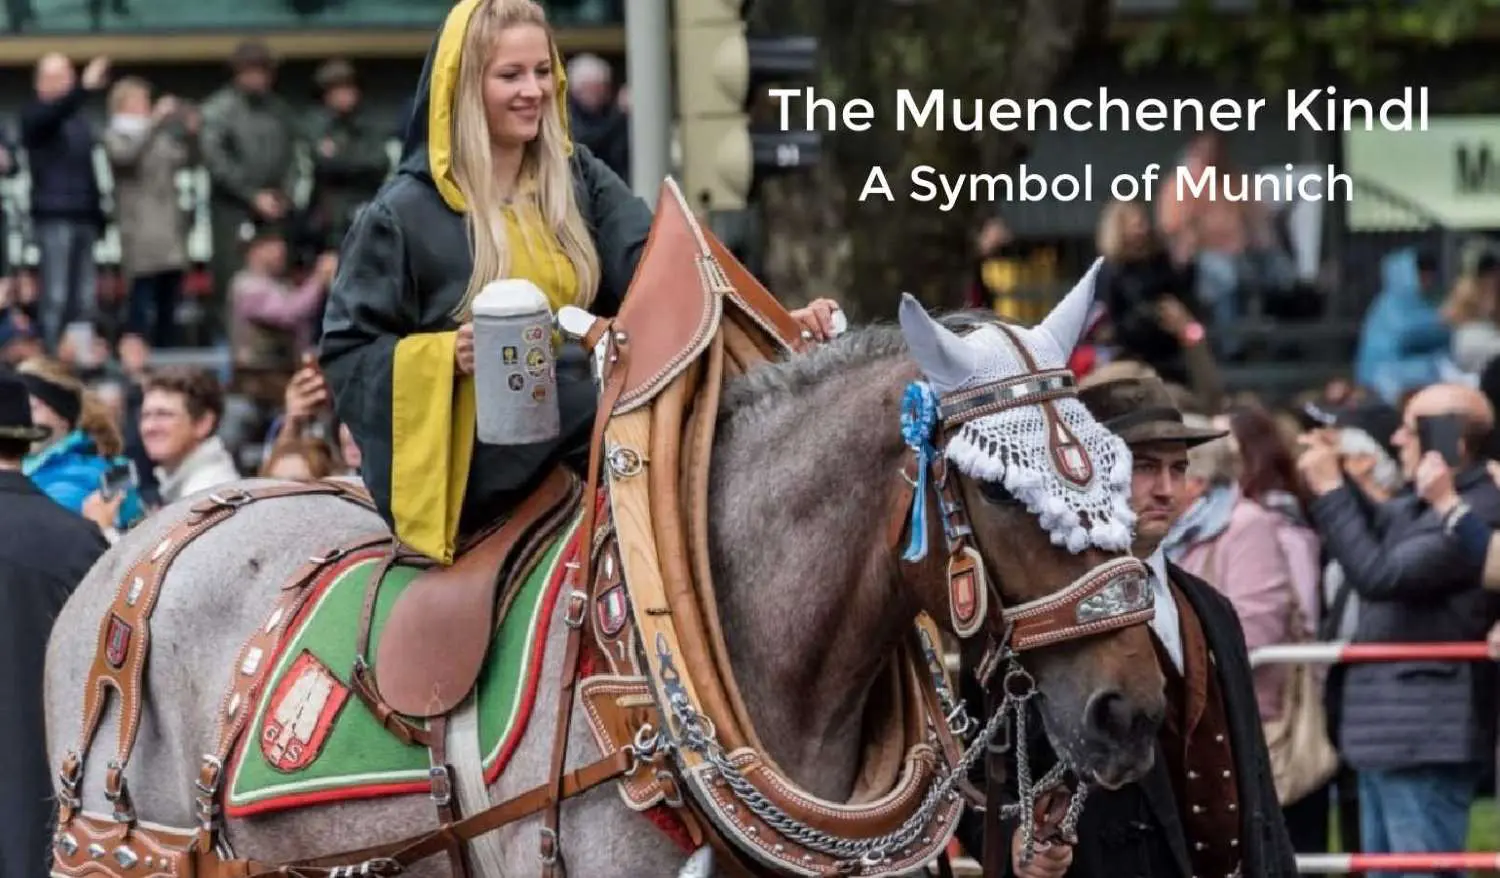 The Muenchener Kindl – The Symbol of Munich